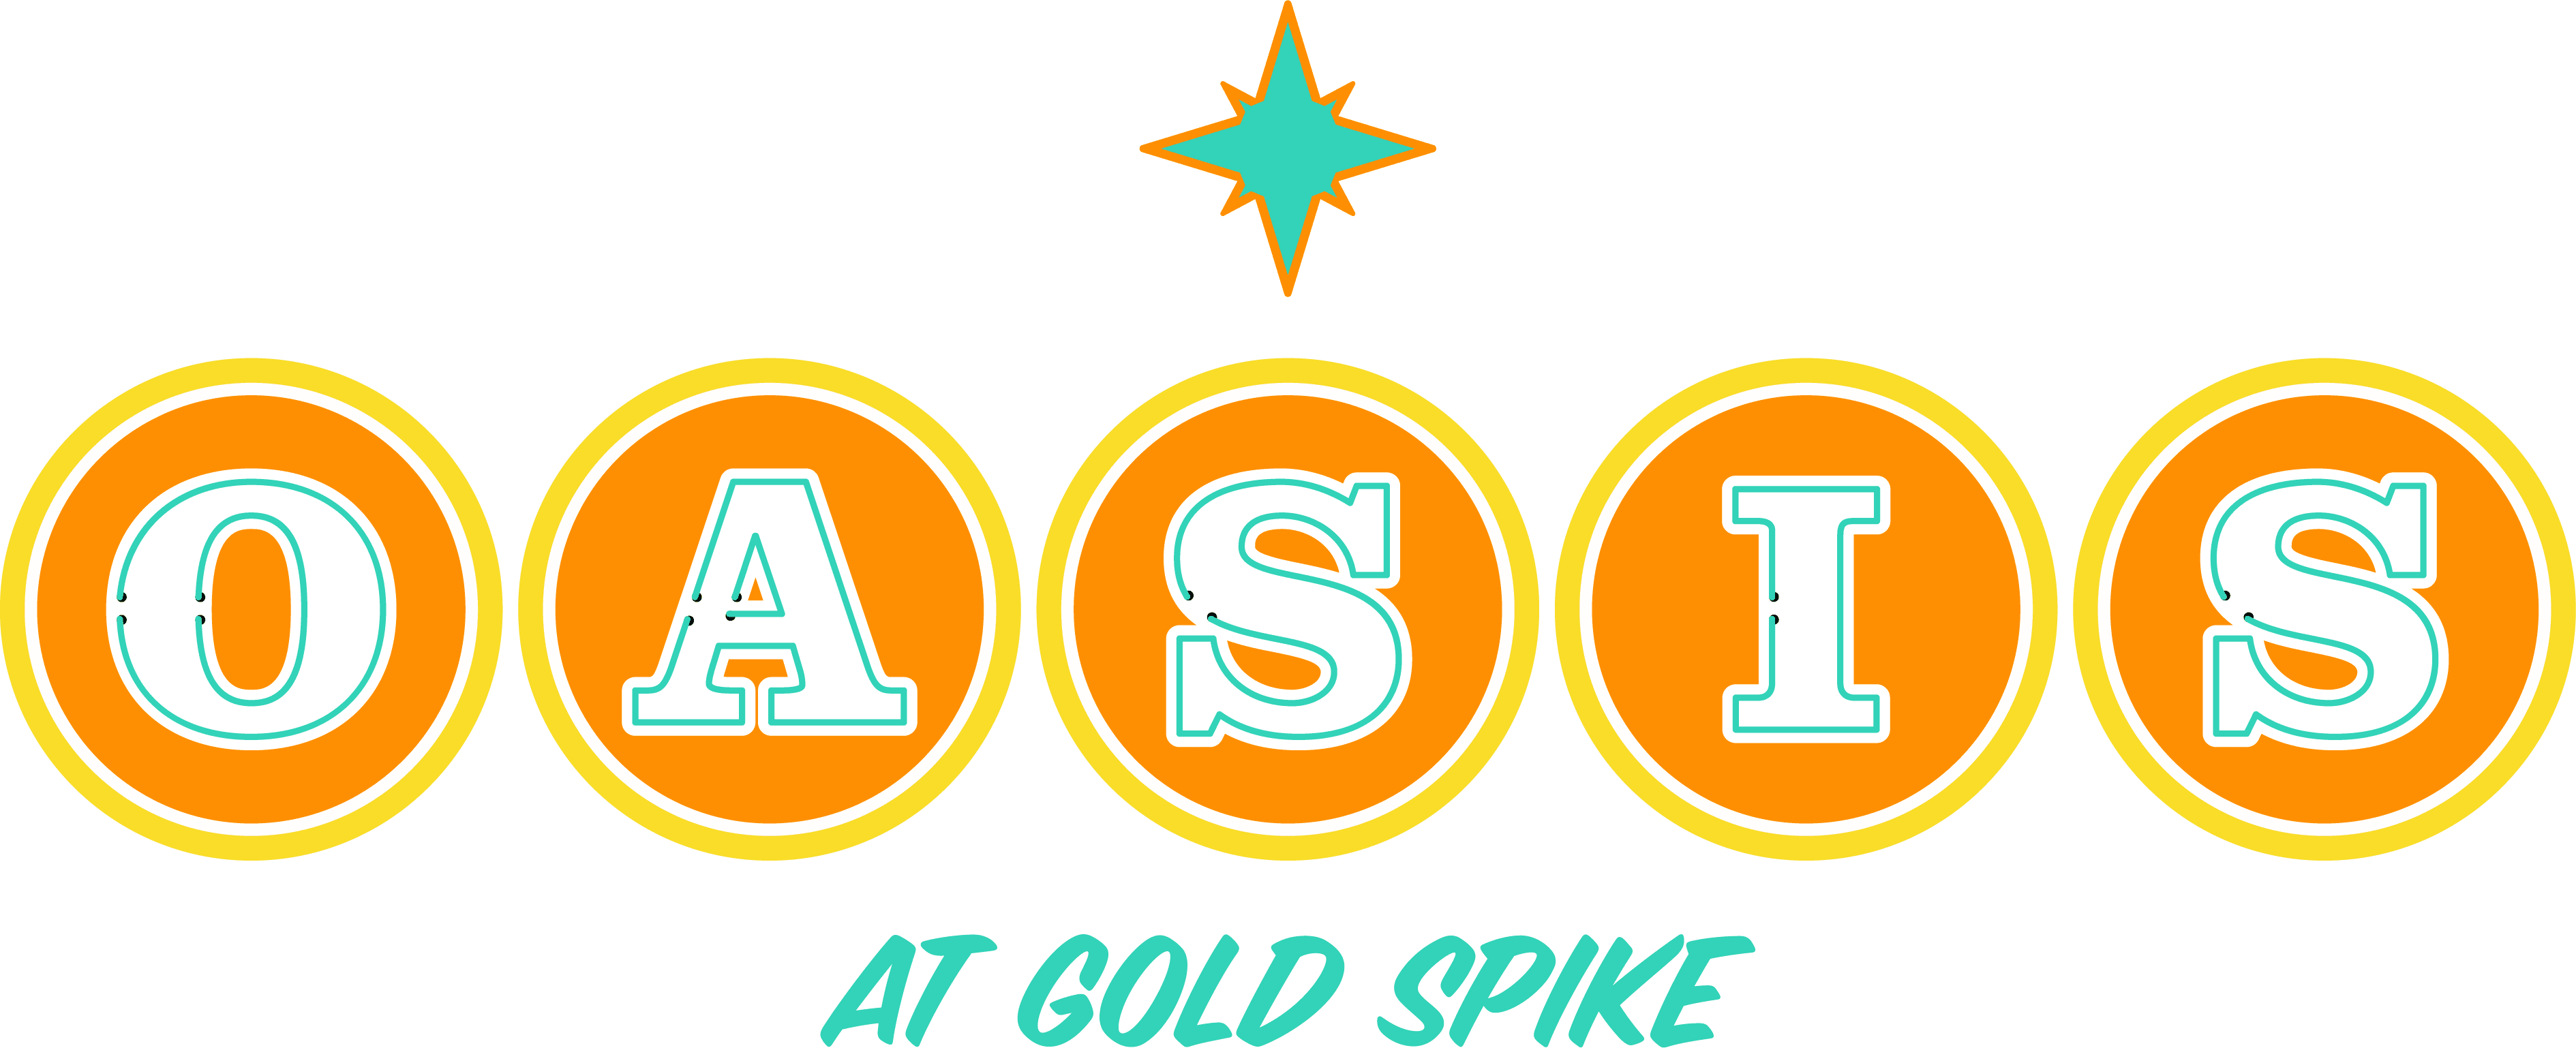 oasis at gold spike